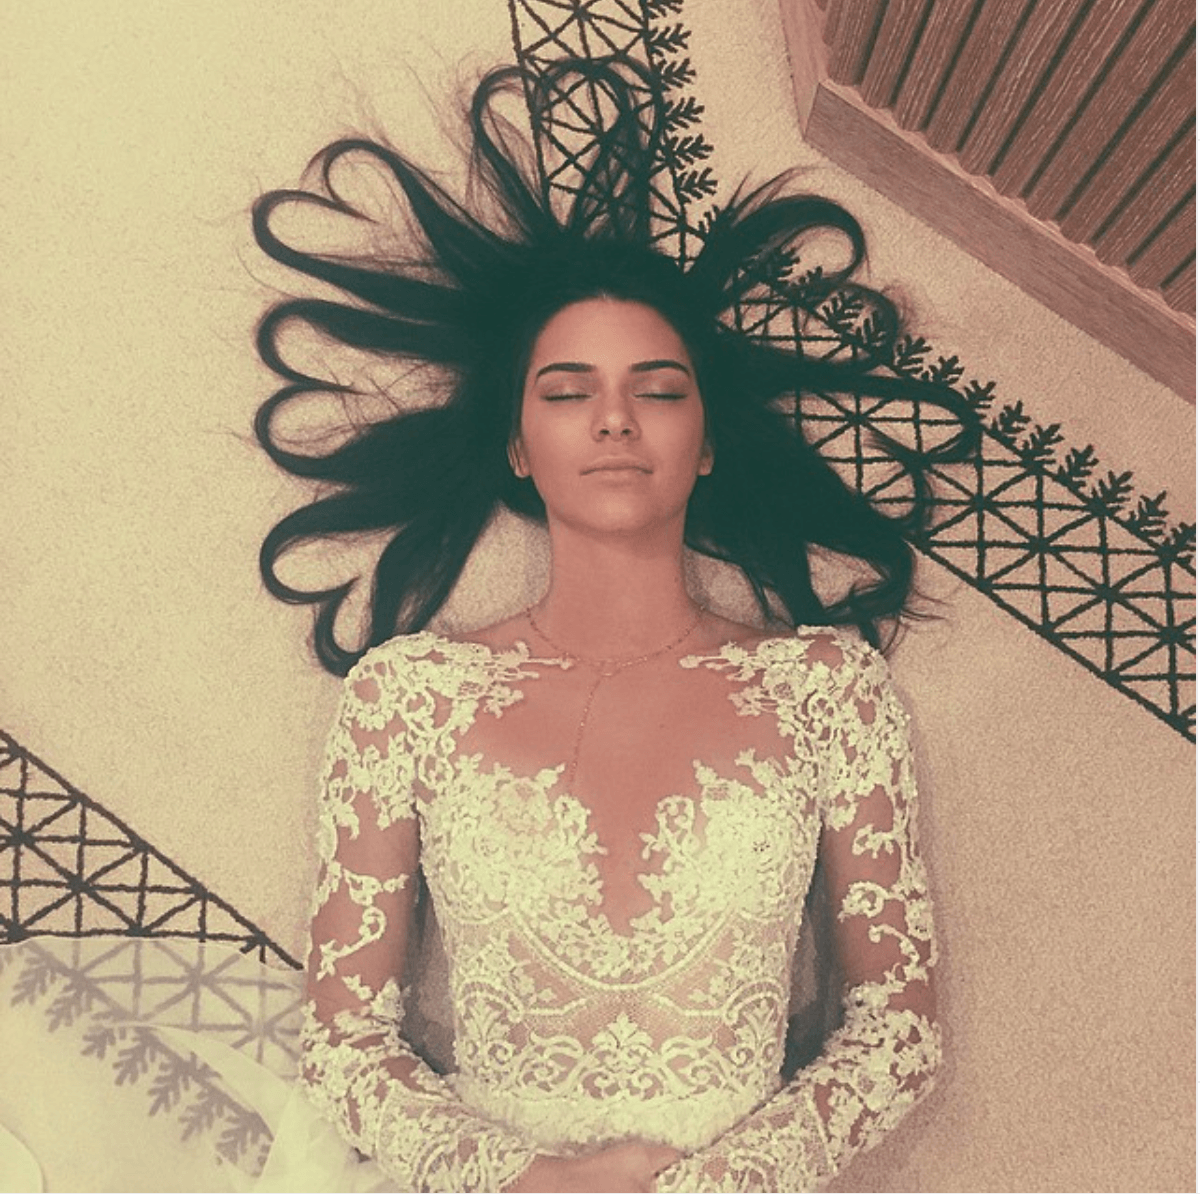 The most liked Instagram post of 2015 by @kendalljenner